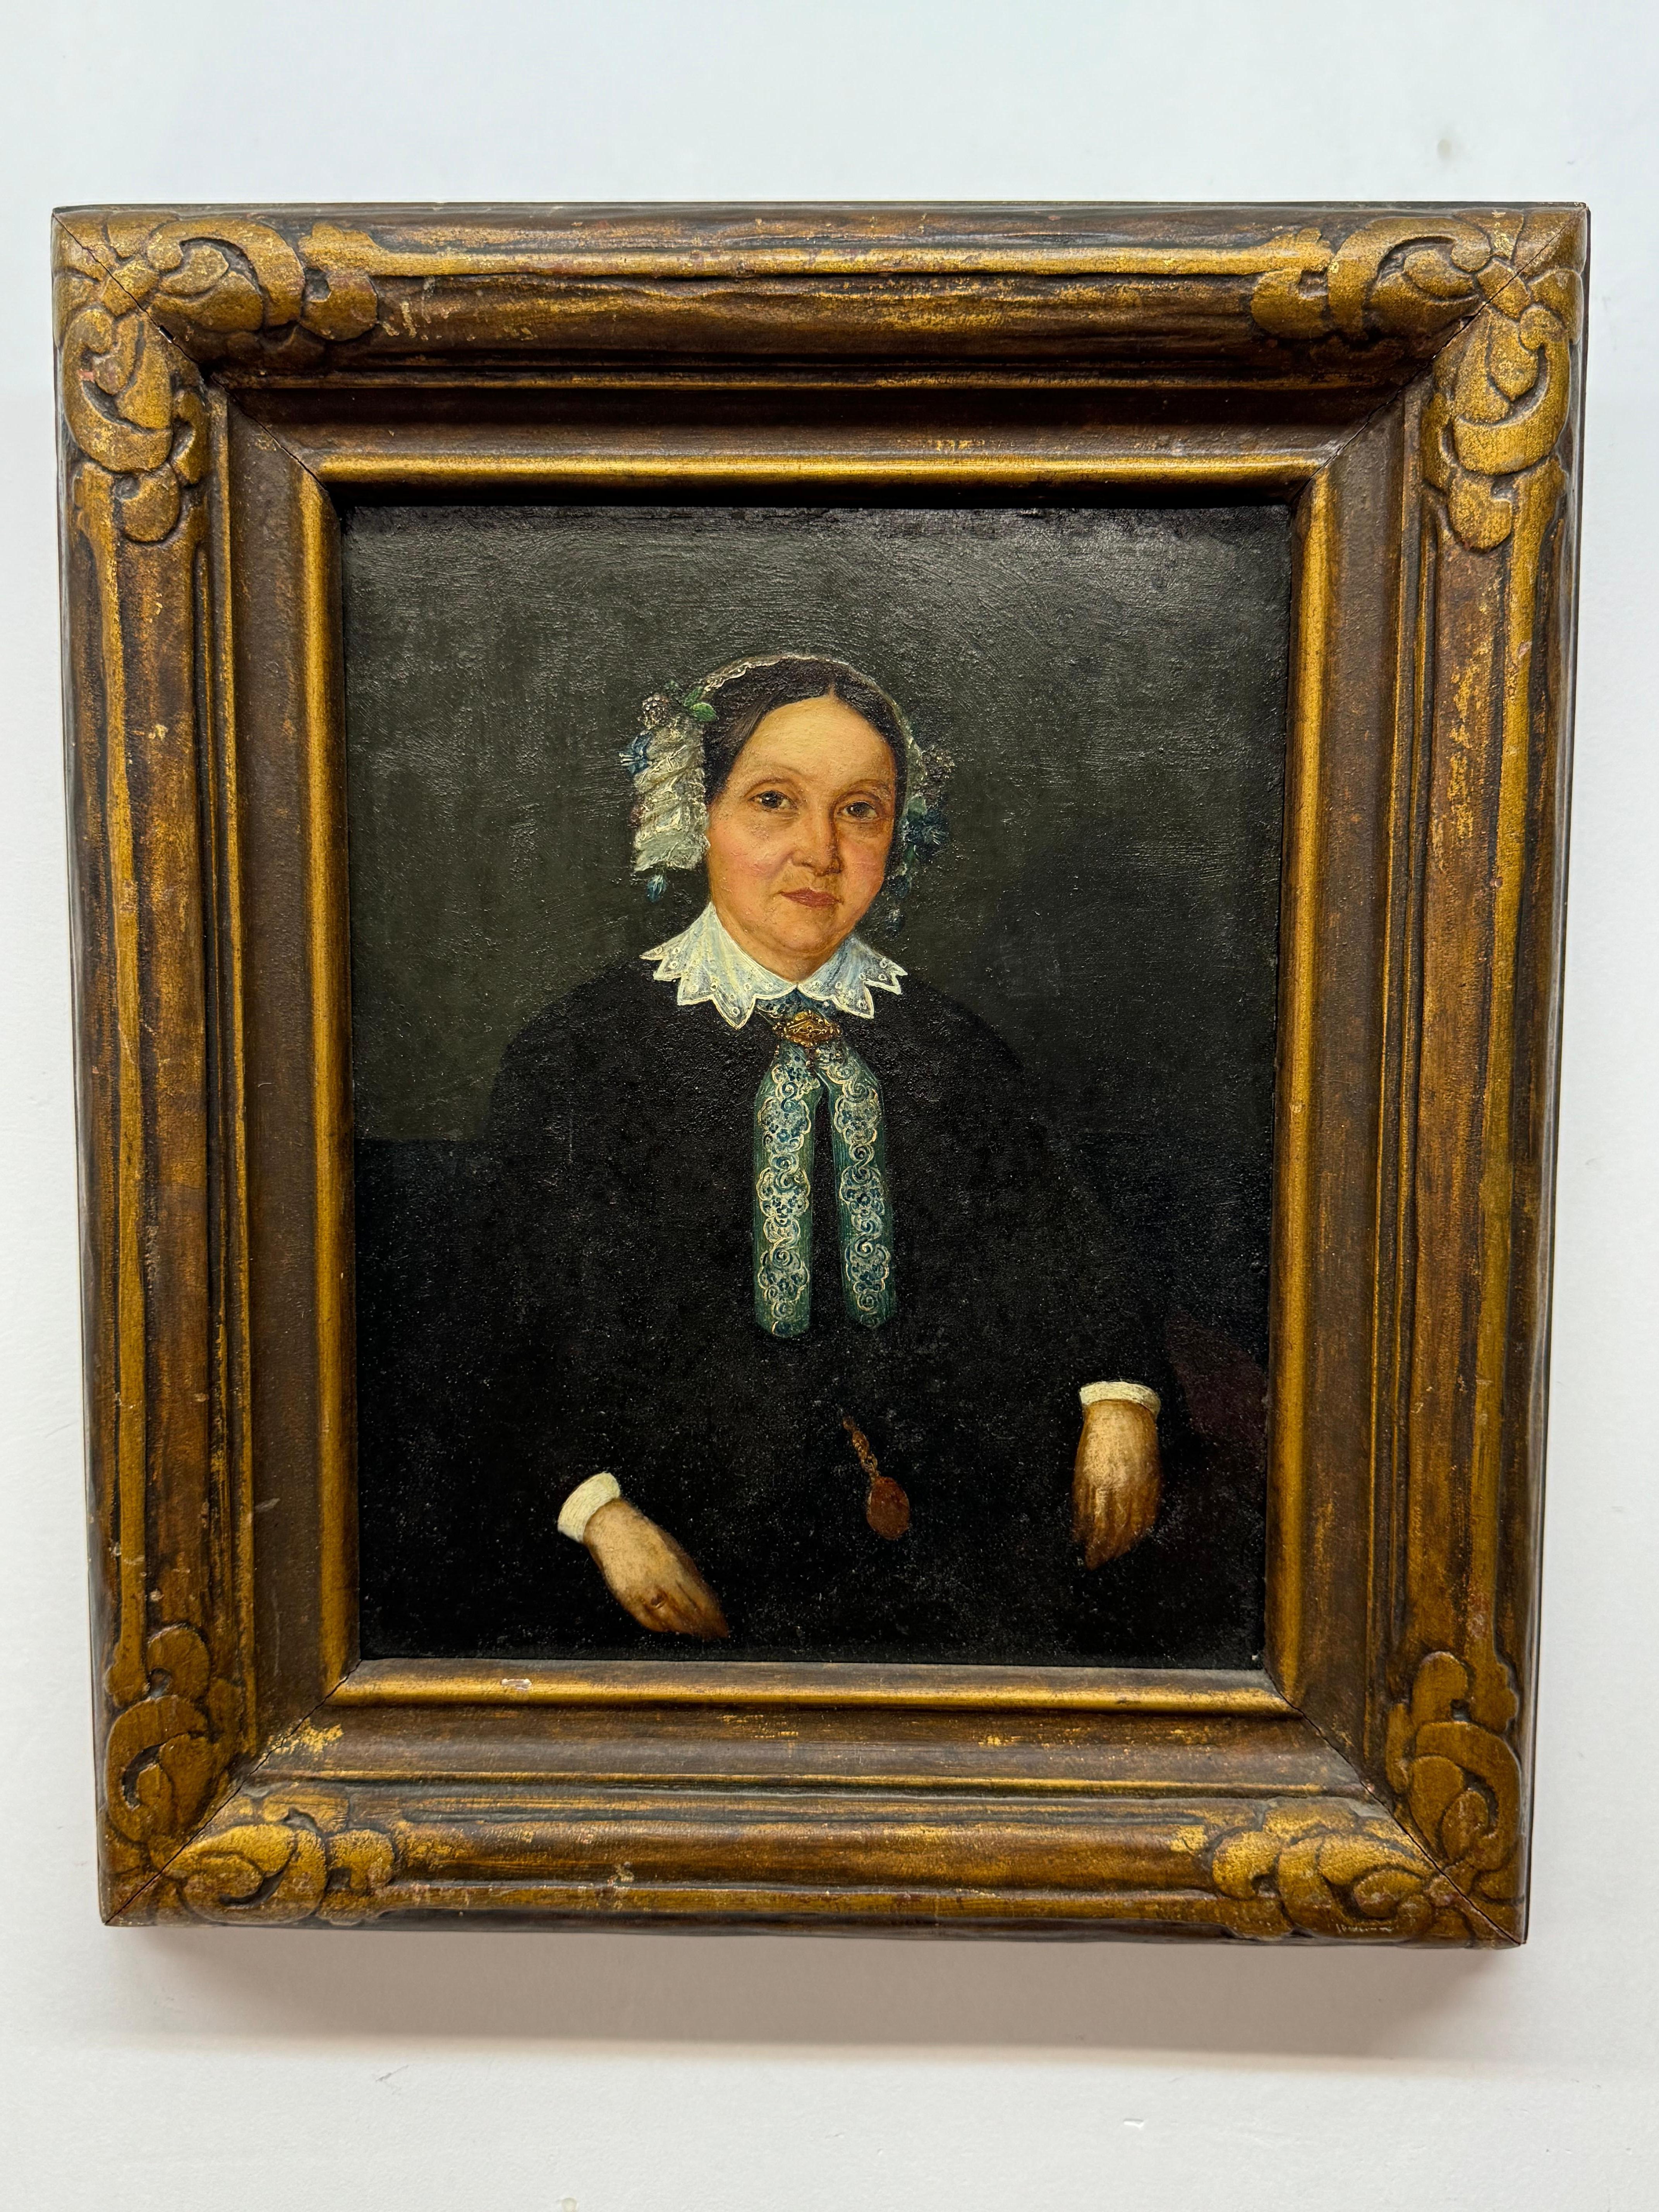 Unknown Portrait Painting - 19th century French Portrait of Matron